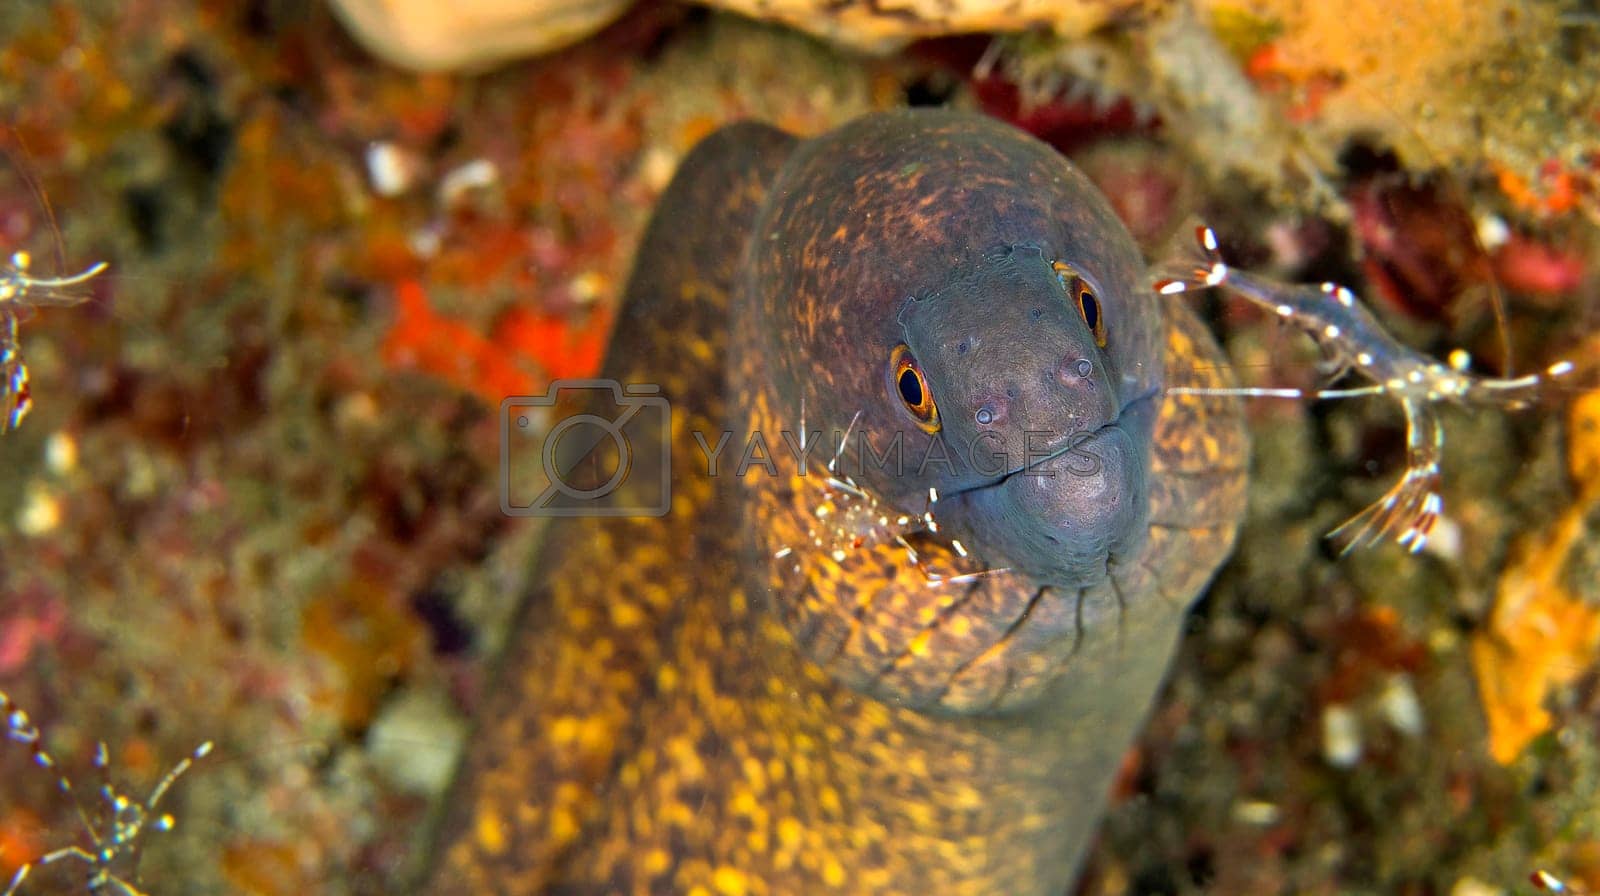 Royalty free image of Giant Moray with Cleaner Shrimp,  Lembeh, Indonesia by alcaproac